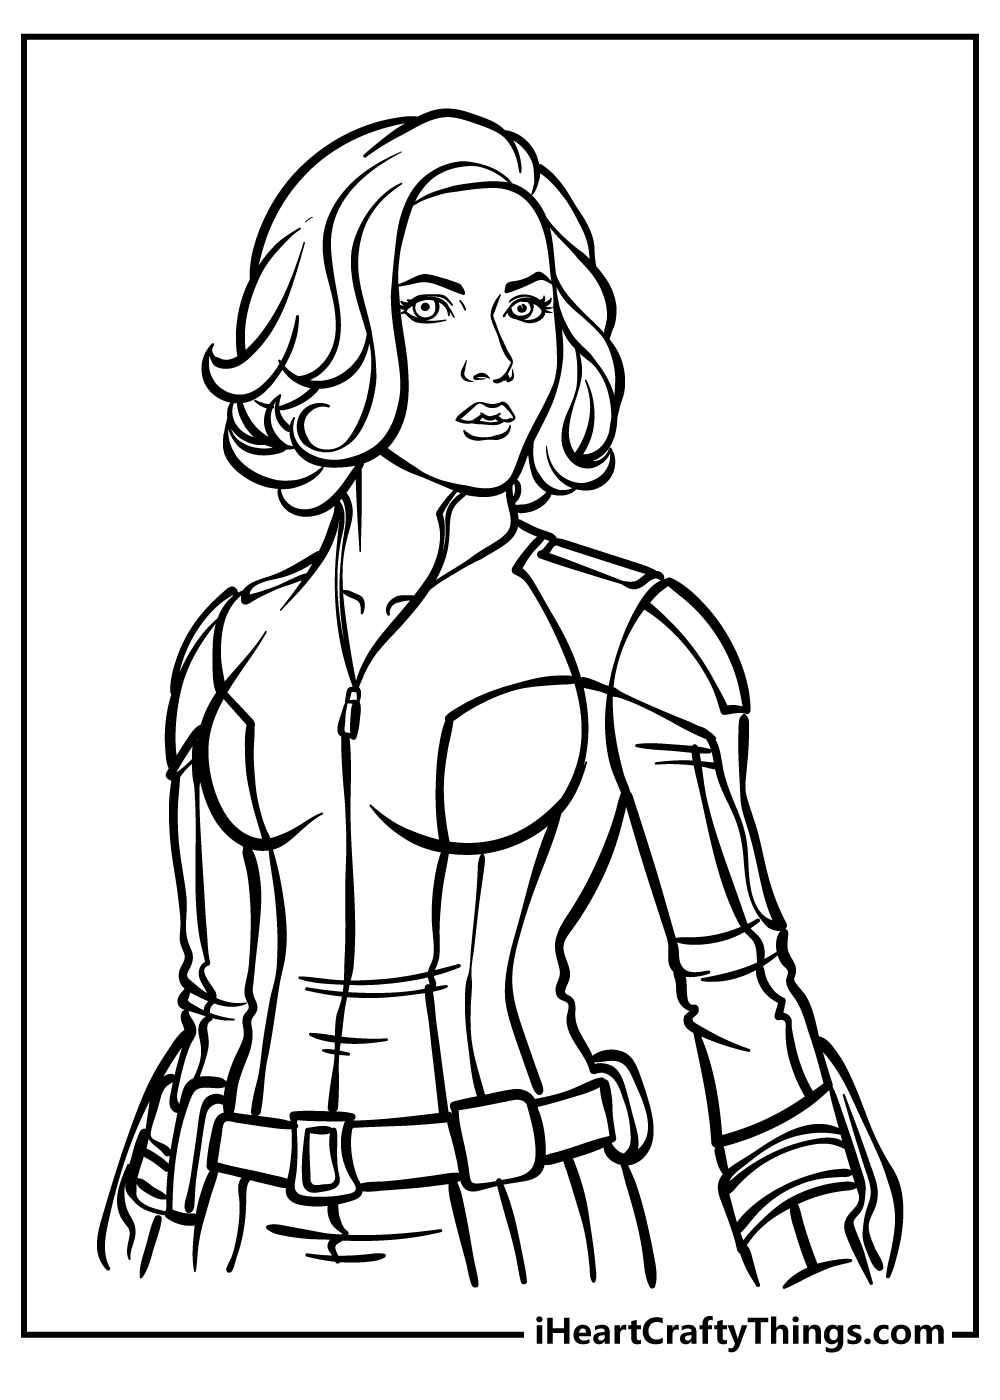 Avengers Coloring Pages free printable